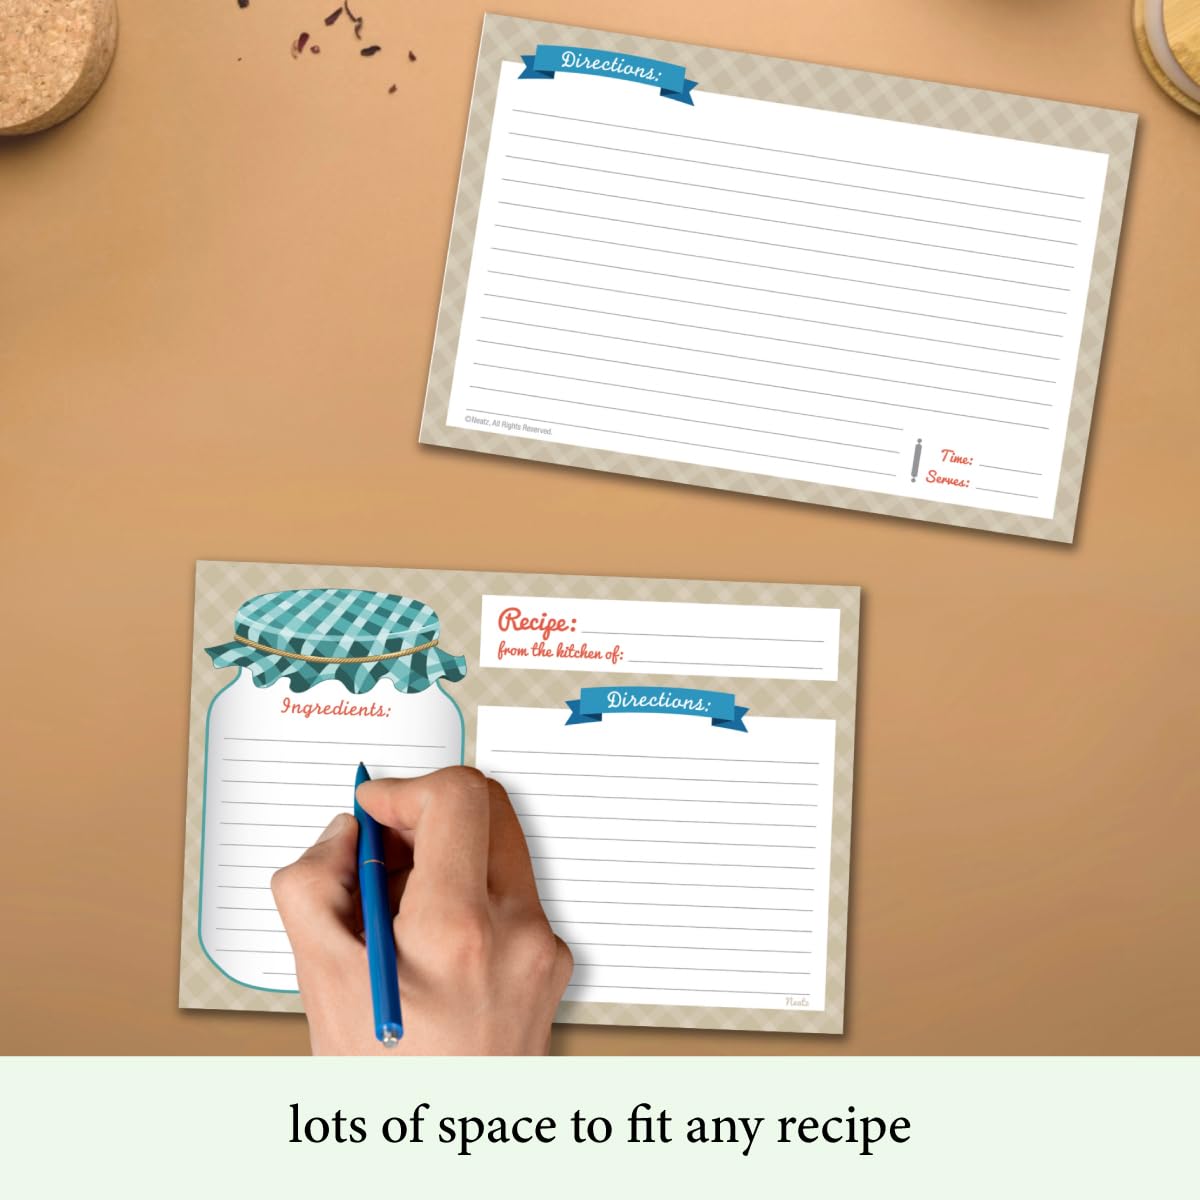 Neatz Mason Jar Recipe Cards - 50 Double Sided Cards, 4x6 inches. Thick Card Stock